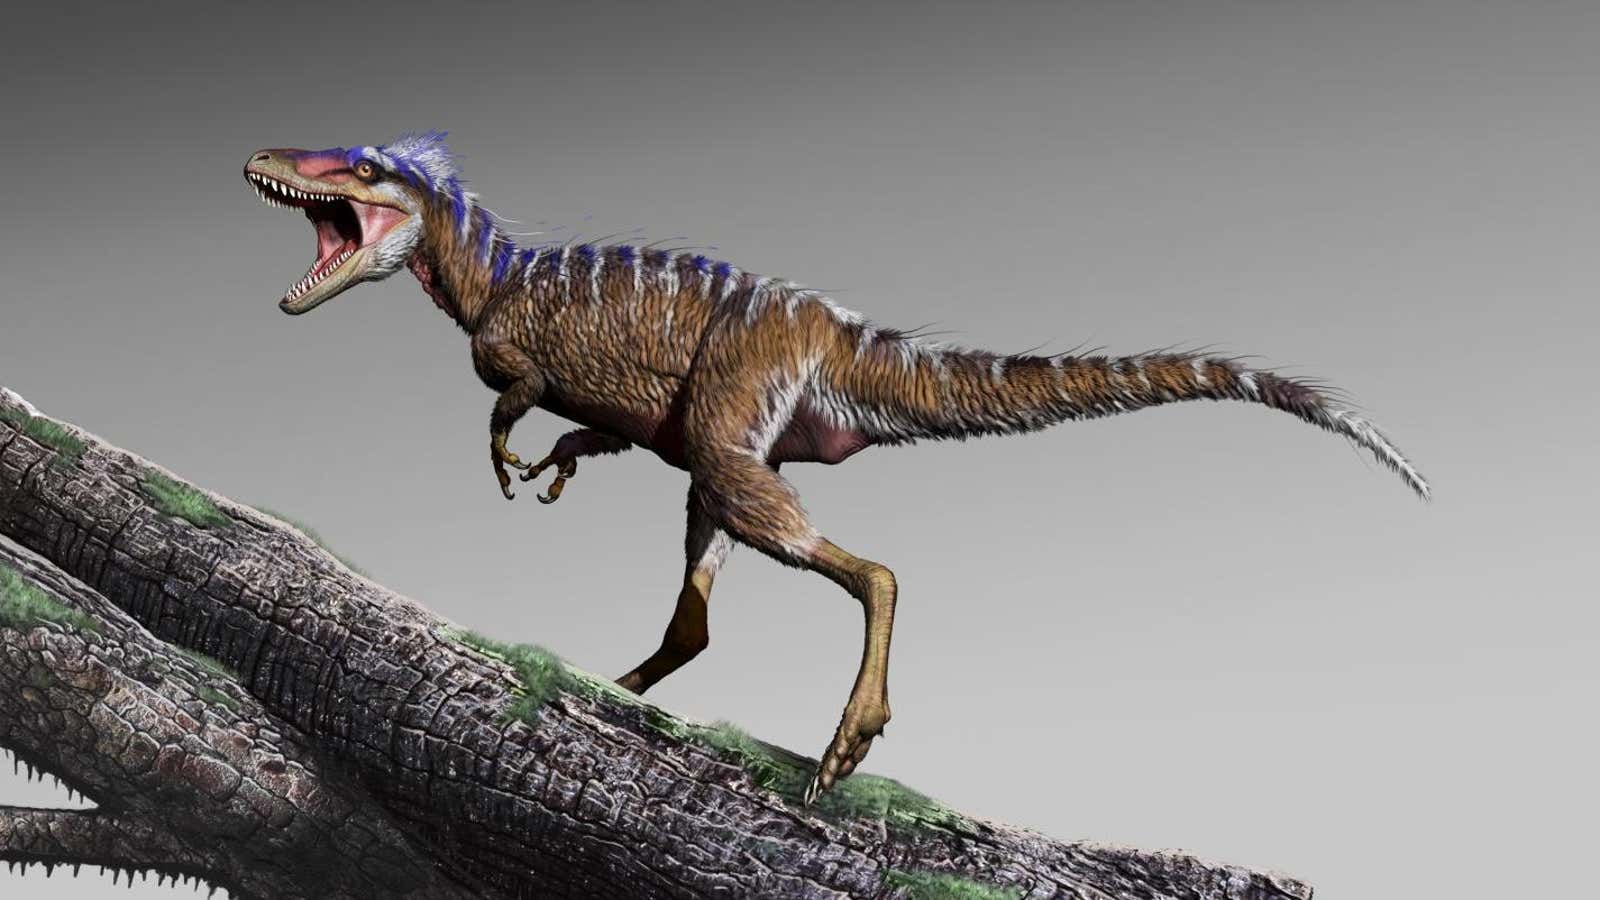 We now know the T. rex evolved from something the size of a deer.